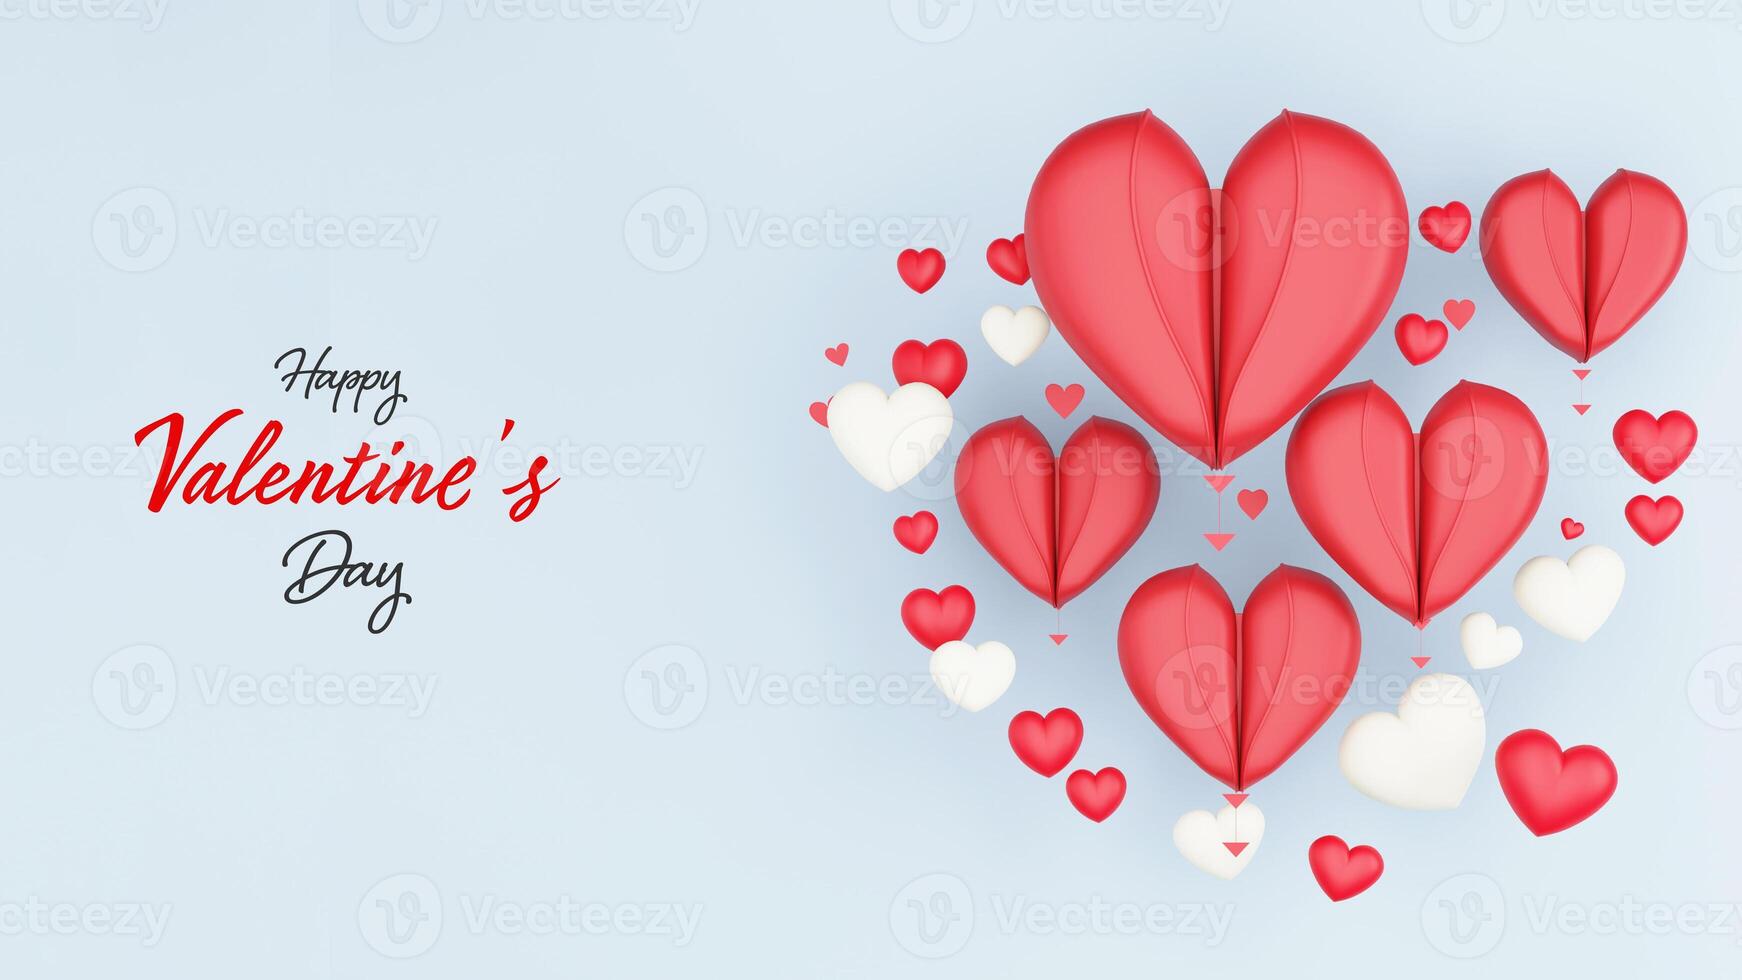 Happy Valentine's Day Landing Page Or Banner Design With 3D Render, Paper Cut Hearts Shapes. photo